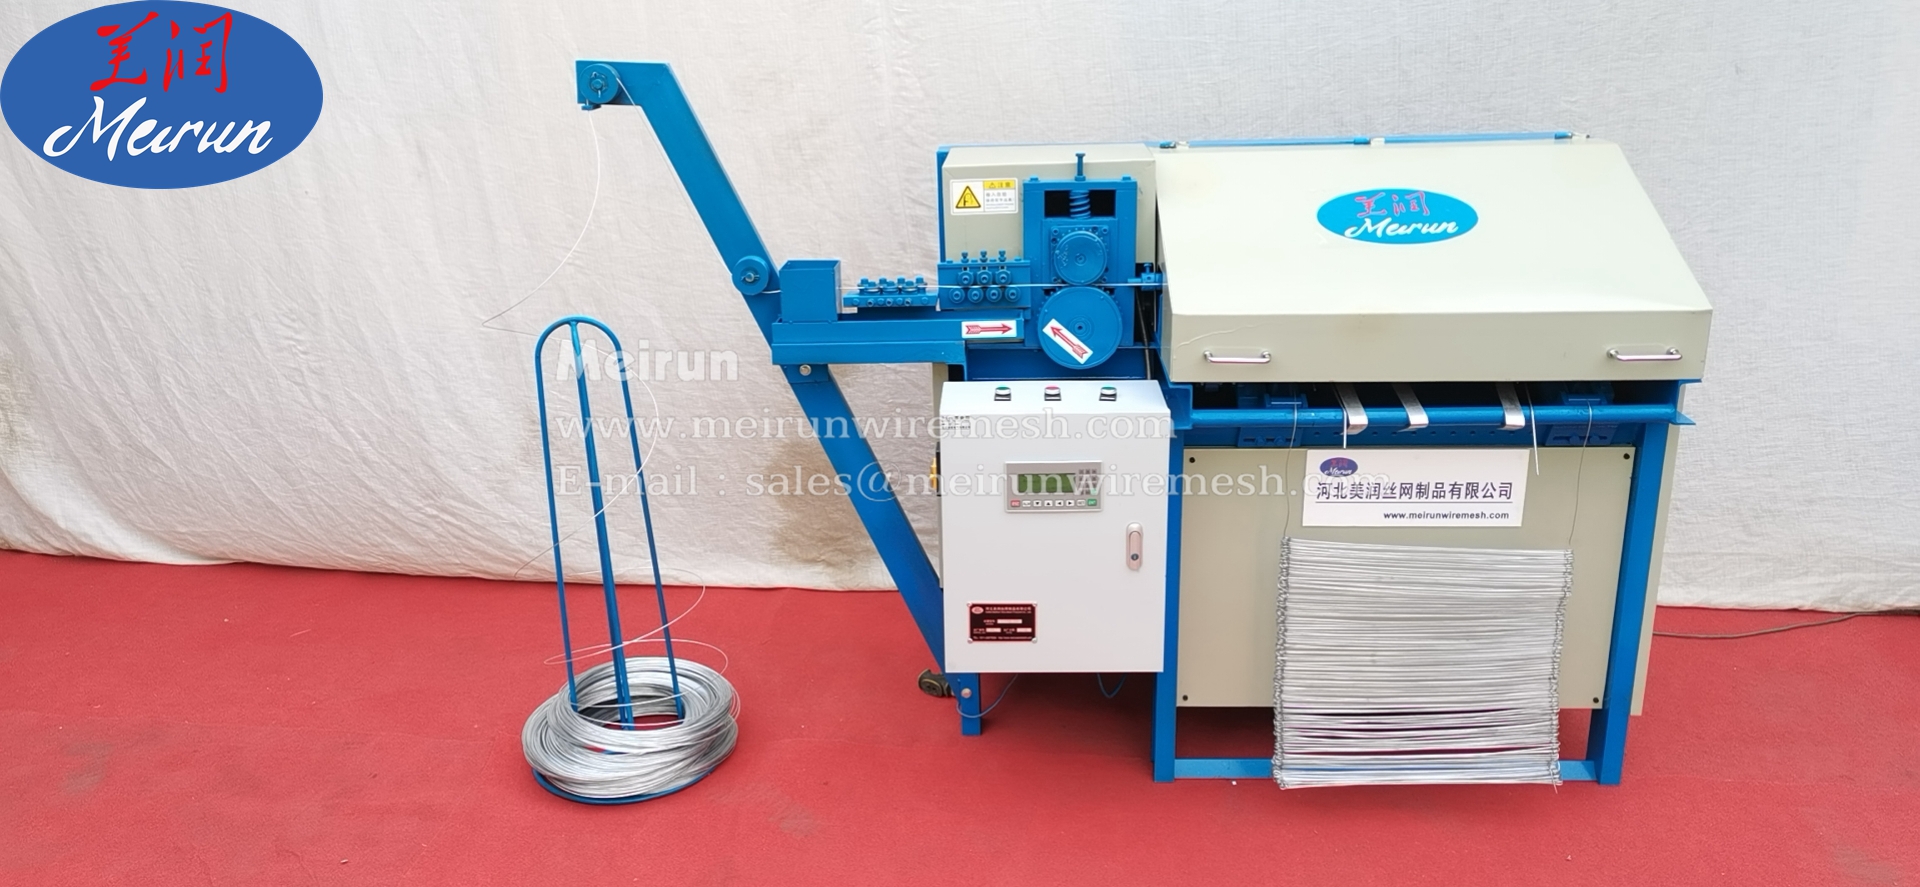 Factory Price Stainless Steel Material Double Loop Rebar Wire Machine 